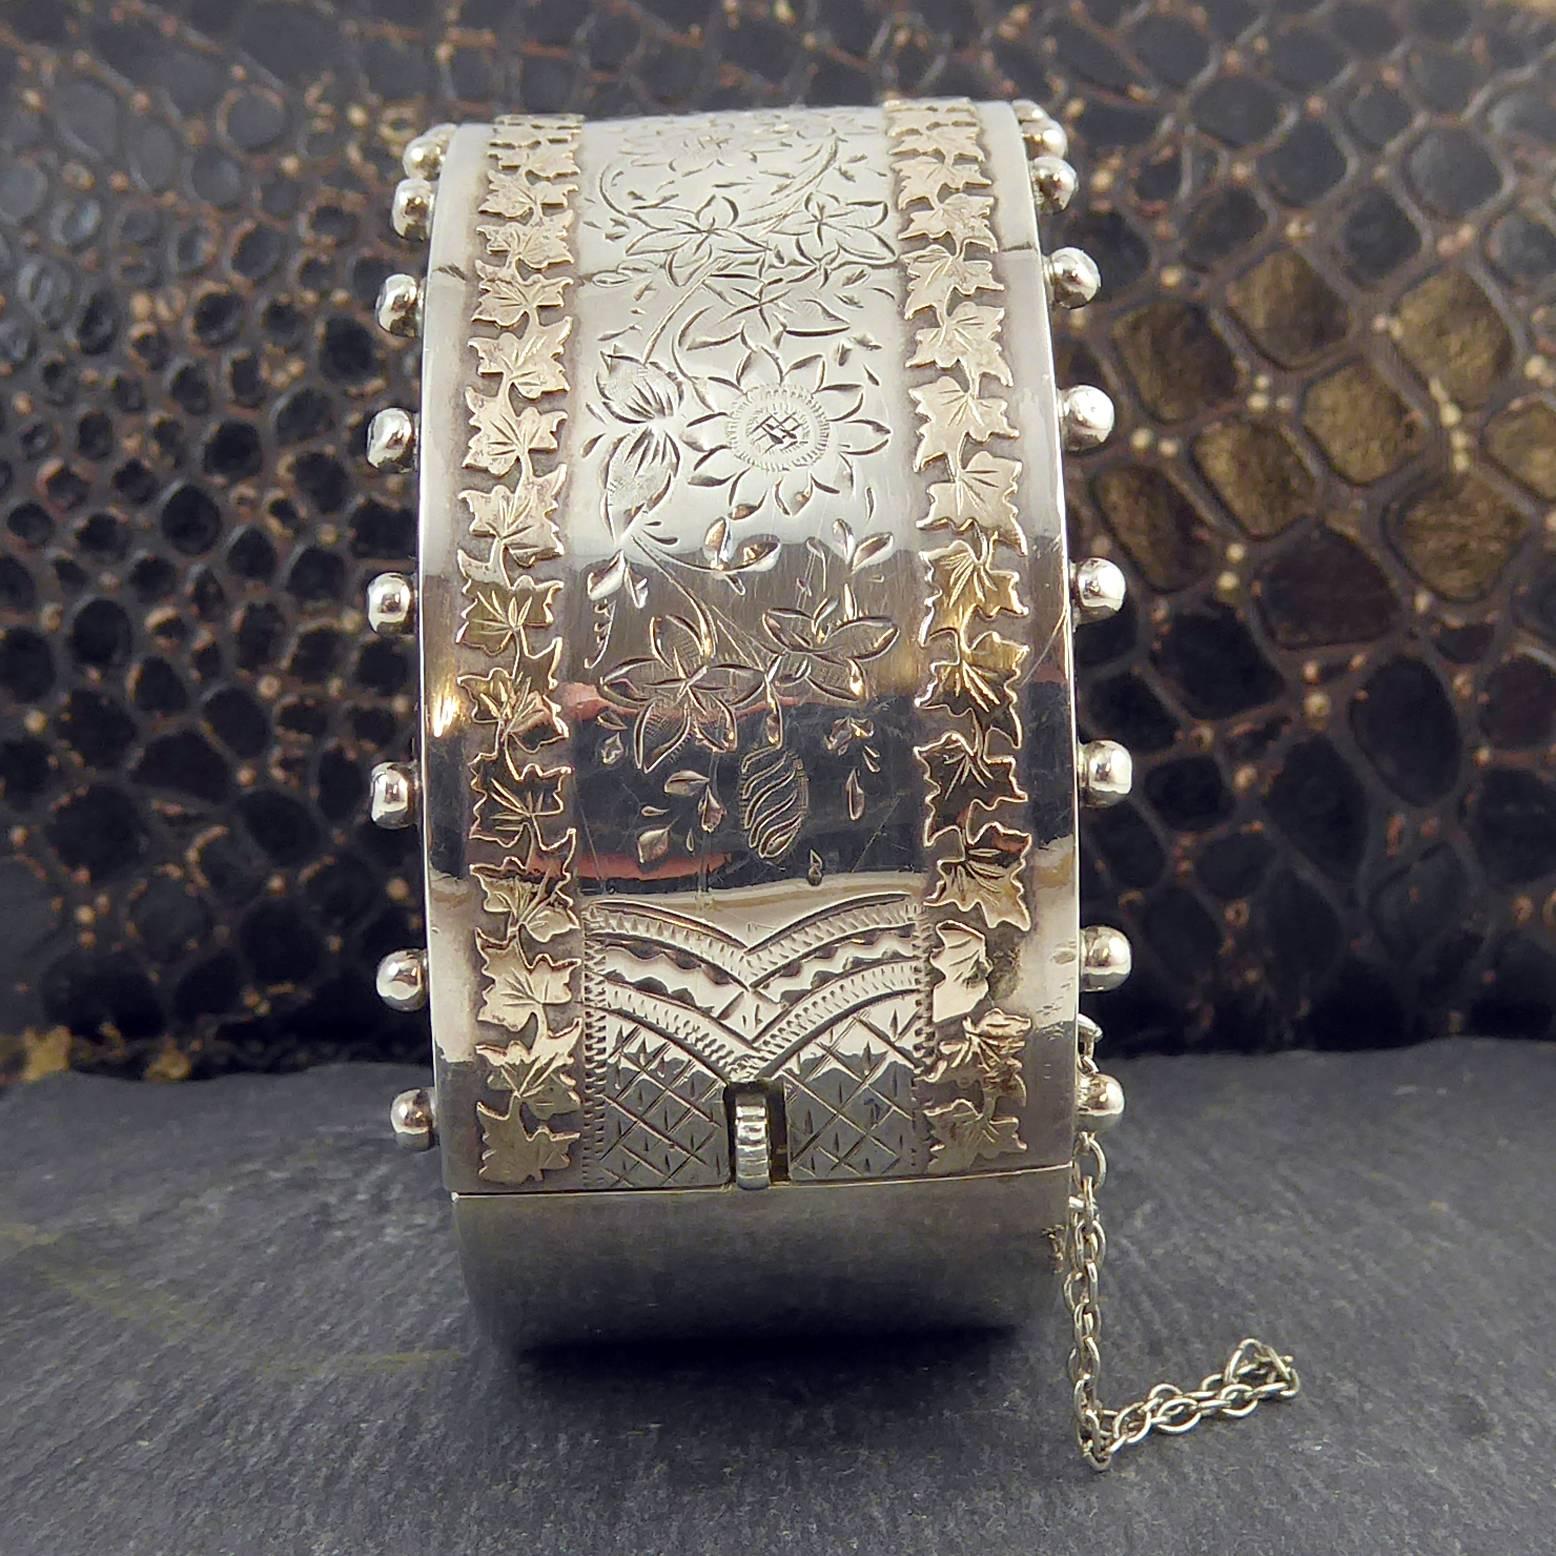 A fabulous Victorian silver cuff bangle hallmarked at the Birmingham Assay Office in England in 1884.  The design is bold and eyecatching in a cuff style which would look sensational worn over a fine wool sweater.

Silver beads are evenly spaced